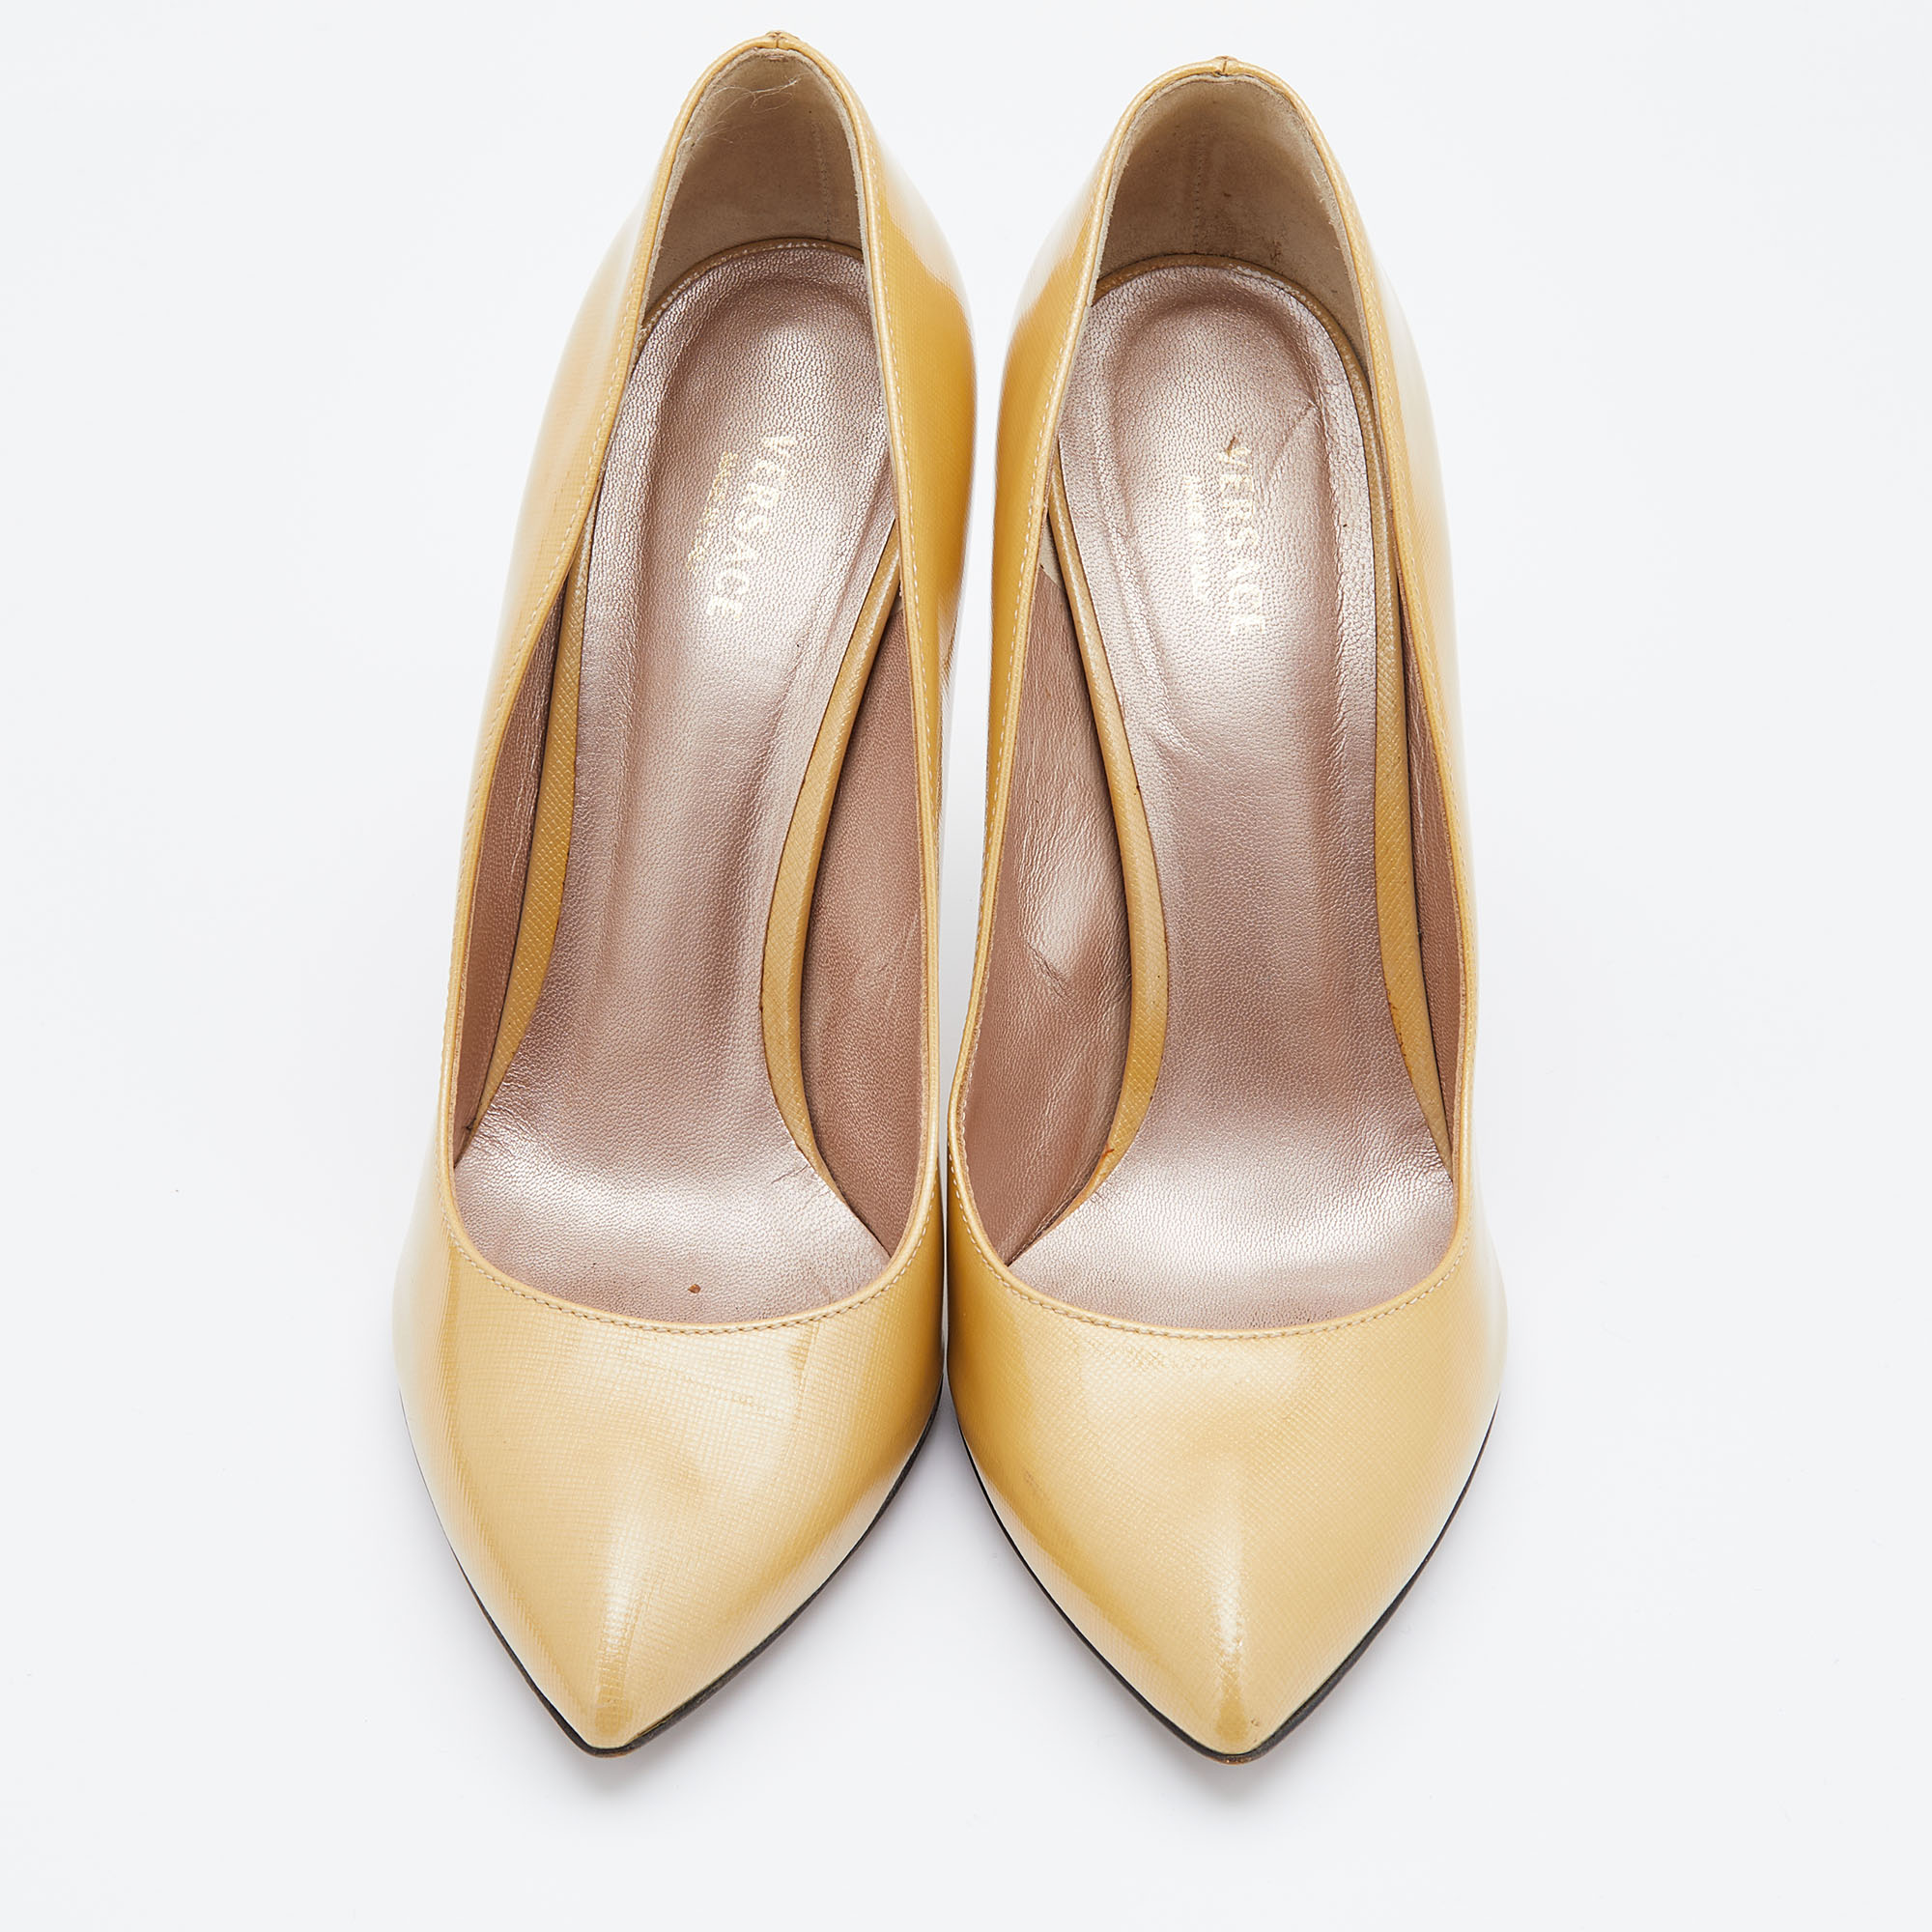 Versace Light Yellow Patent Leather Pointed Toe Pumps Size 38